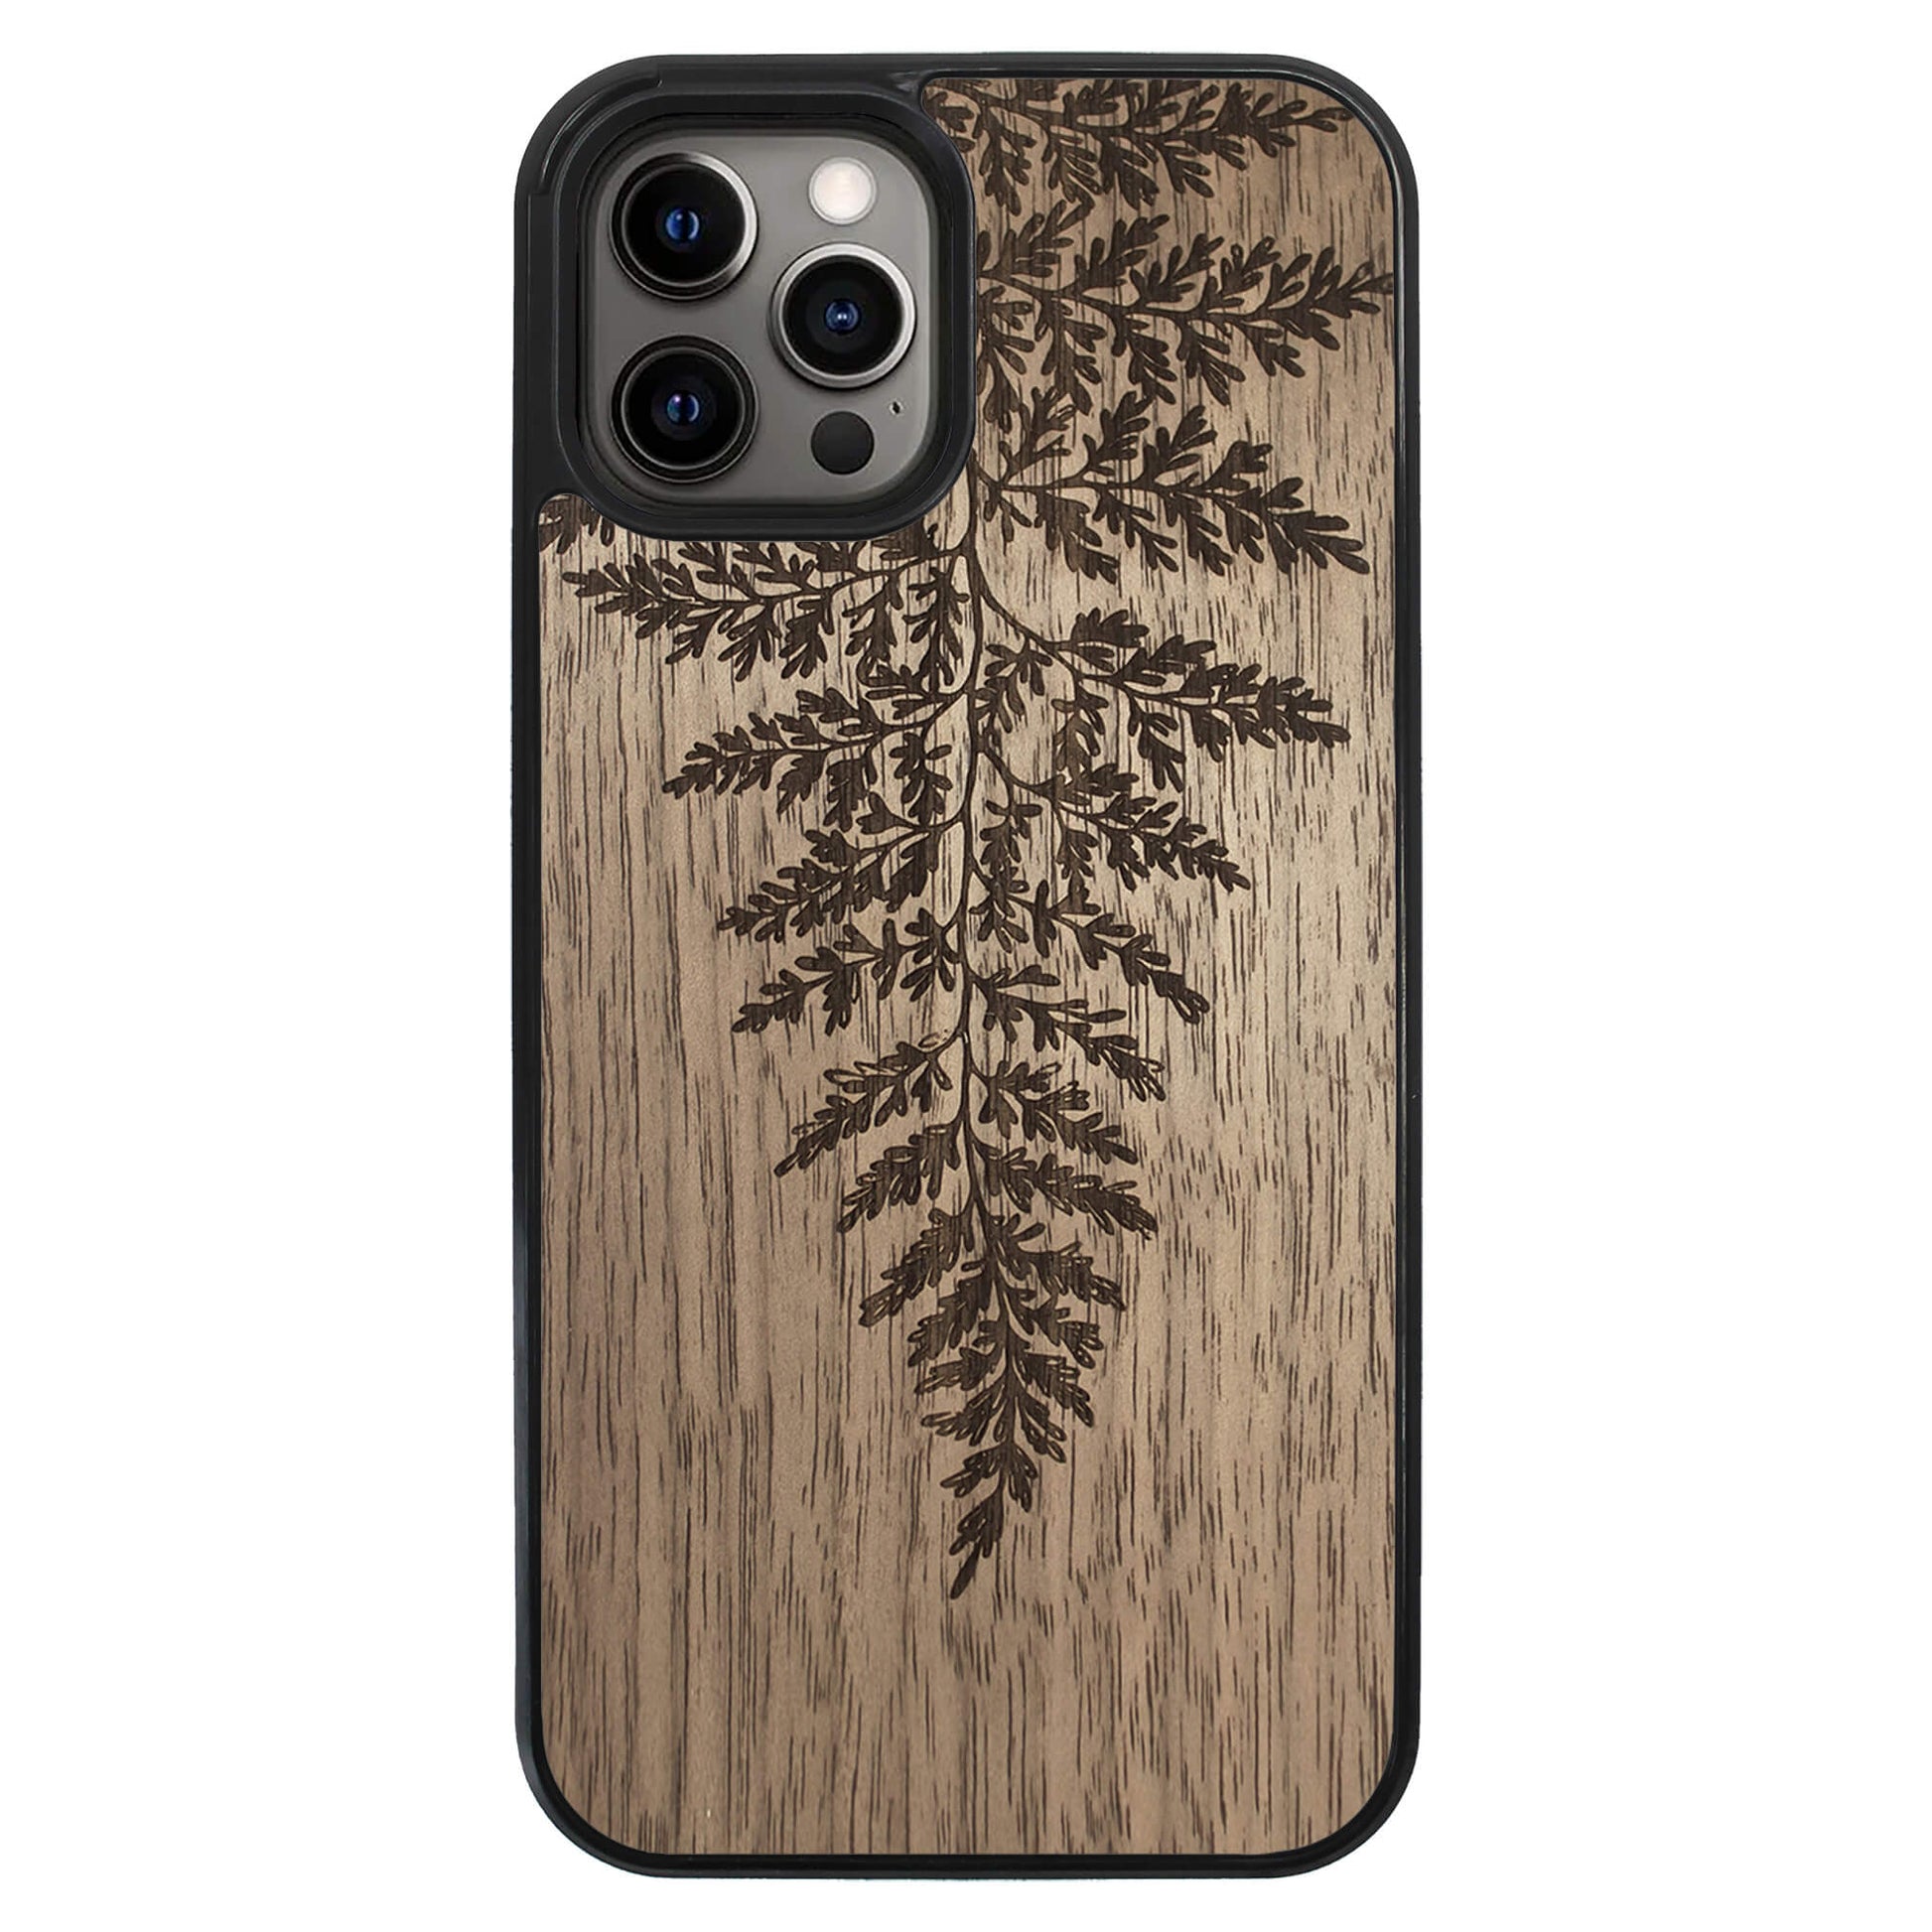 Wooden Case for iPhone 12 Pro Max Fern